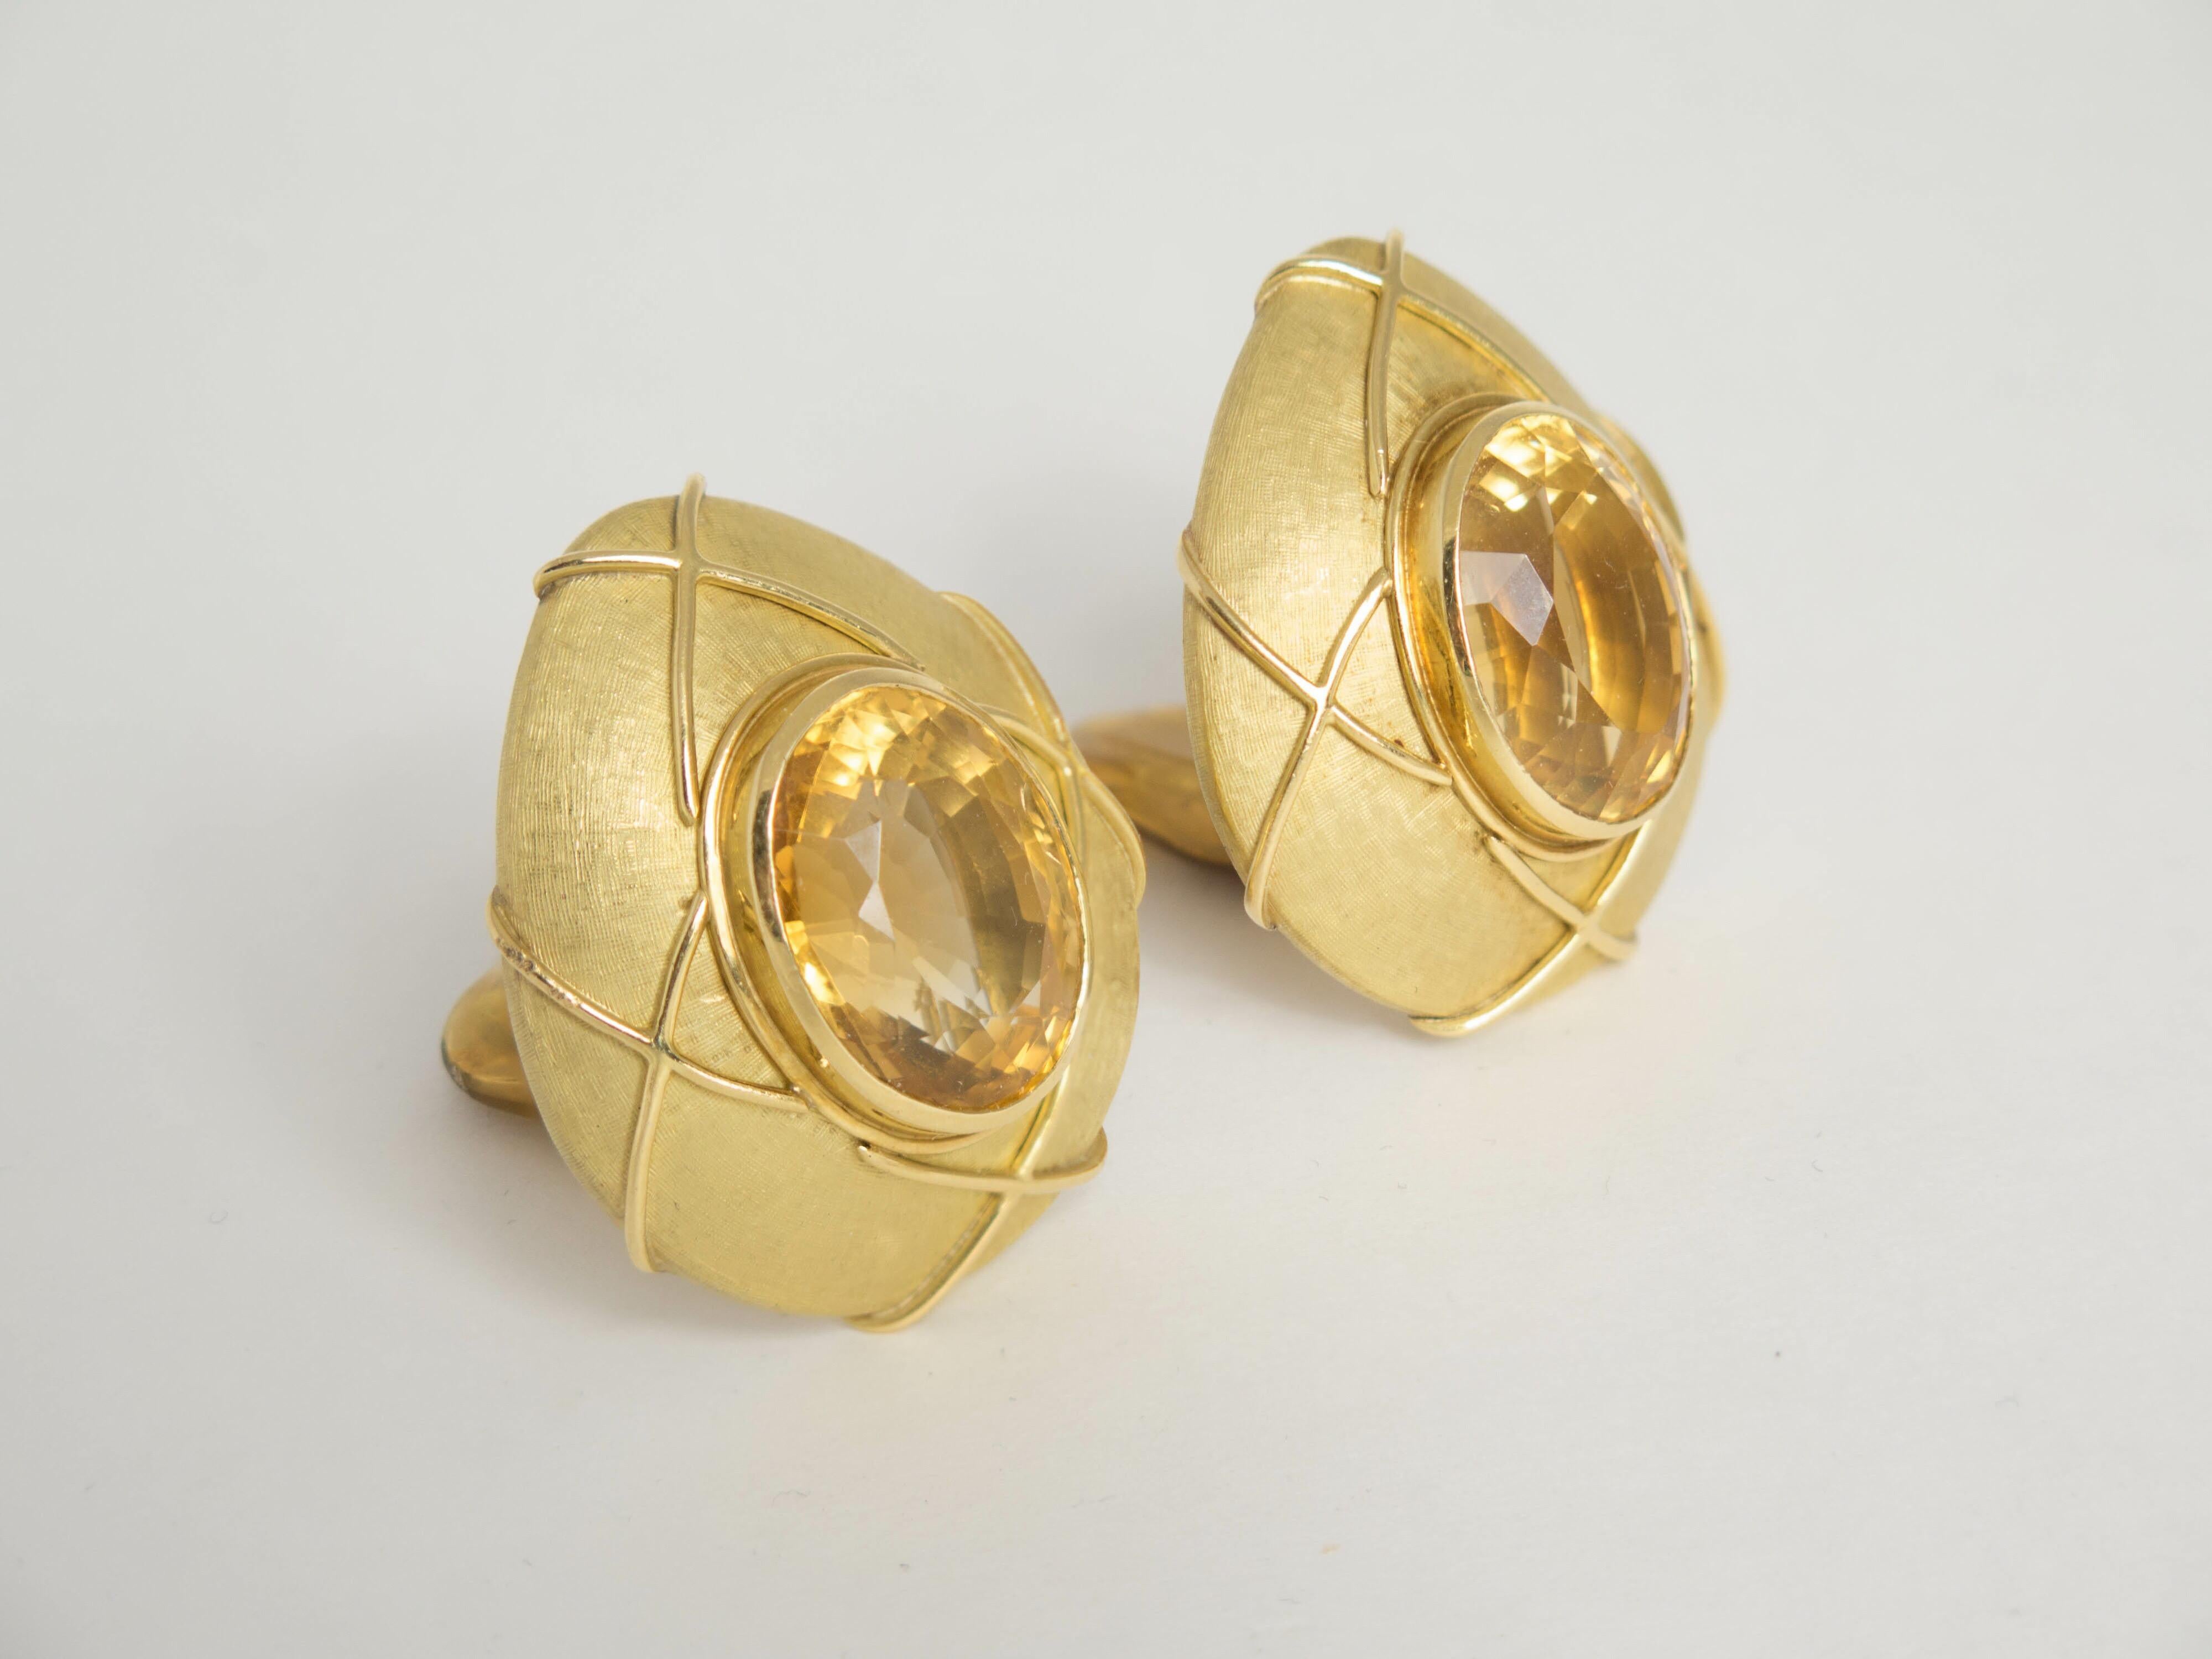 An impressive pair of large 18K yellow brushed gold clip earrings. Each earring centered with a large faceted oval citrine (total weight of both stones 29 carats).  
Concealed pendant hooks. Measured 1.35